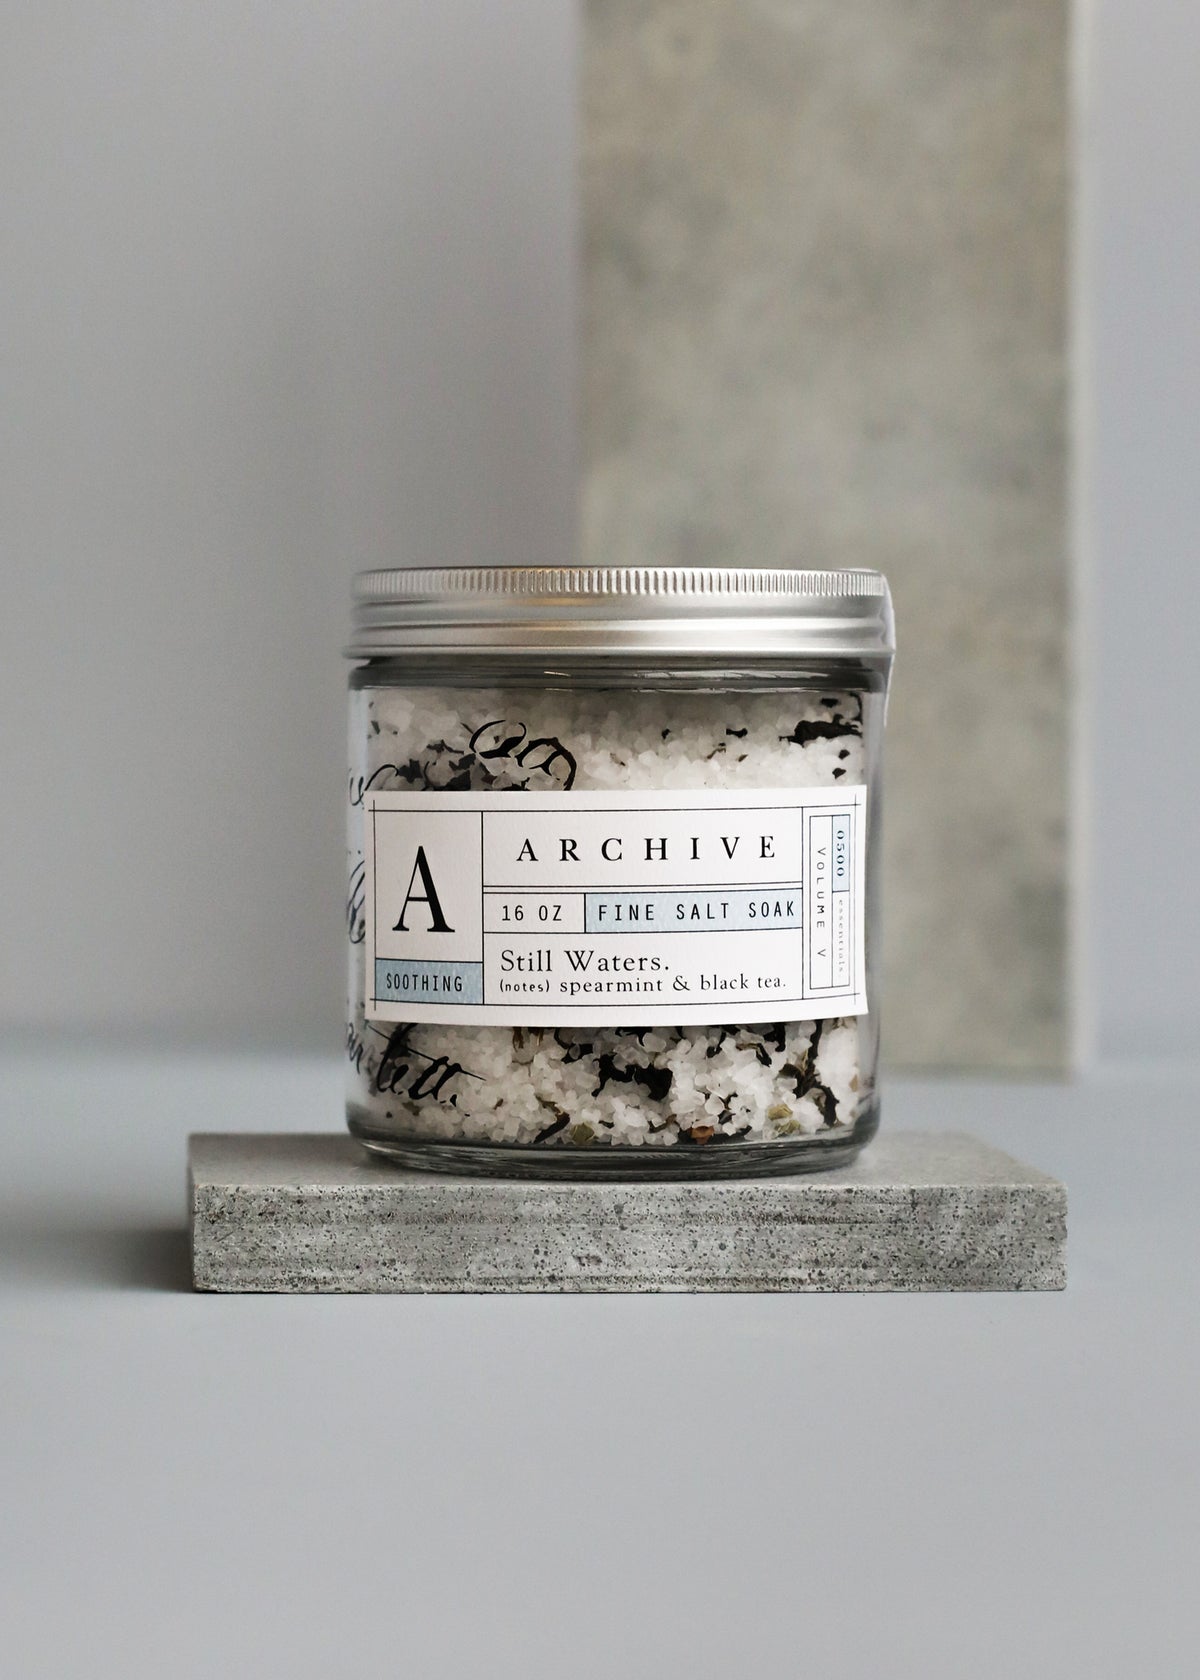 A jar of Margot Elena's ARCHIVE Still Waters Salt Soak, with spearmint and black tea, displayed on a gray stone platform against a neutral backdrop.